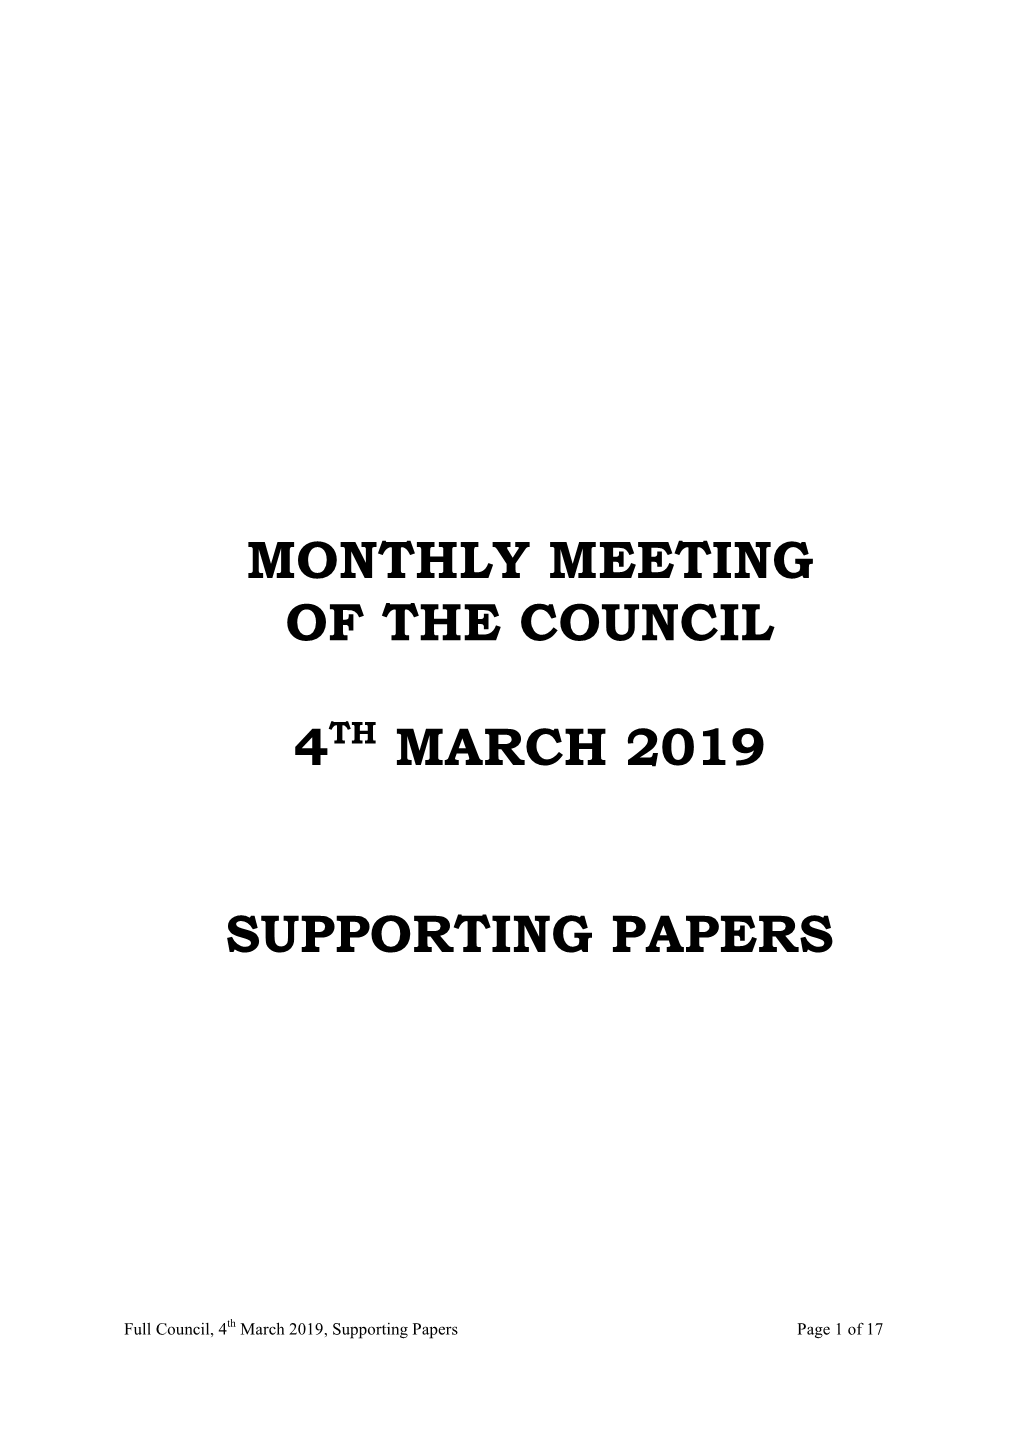 Monthly Meeting of the Council 4Th March 2019